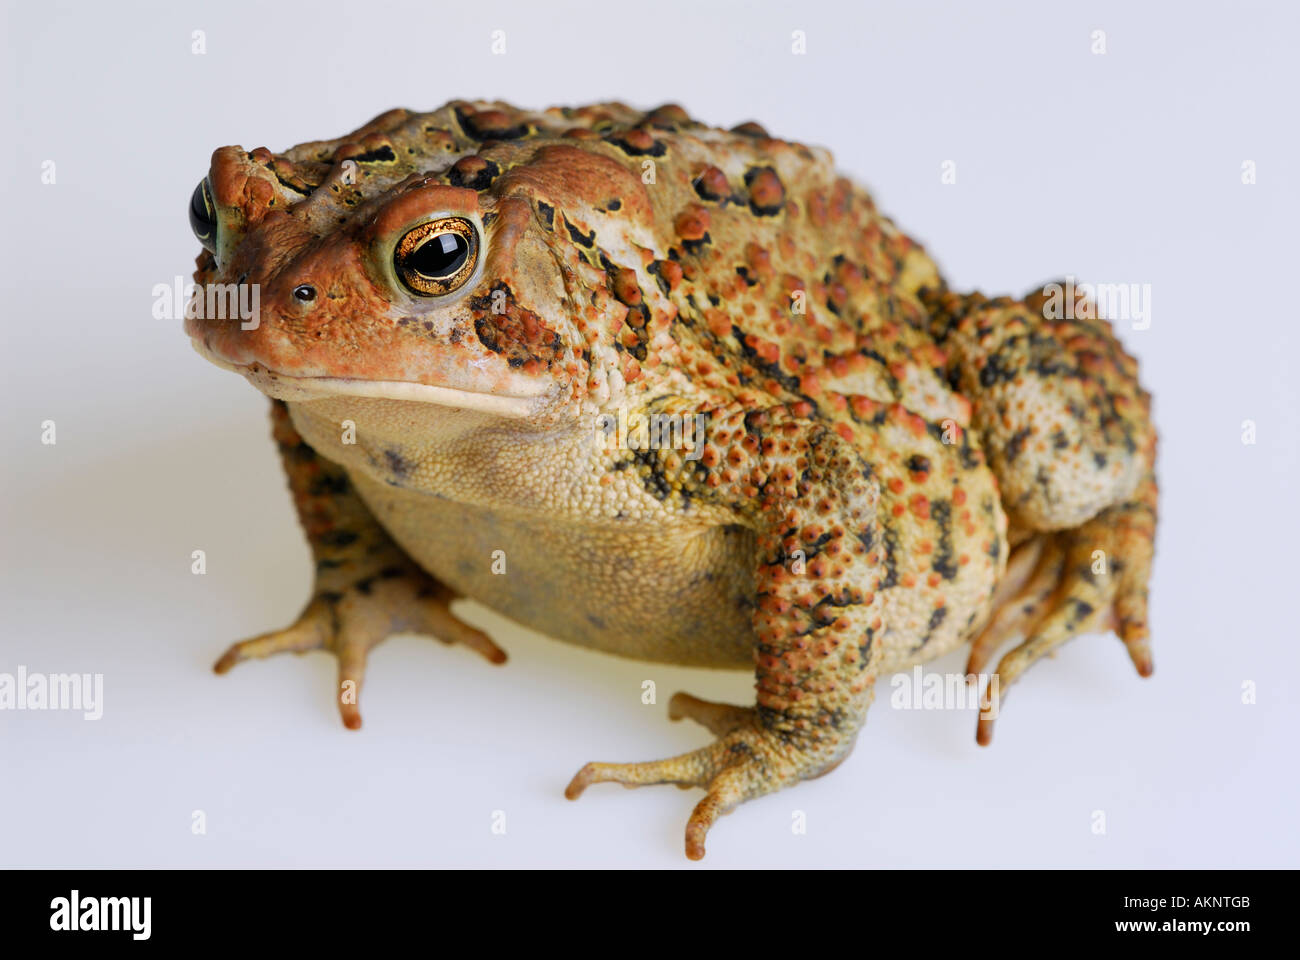 Whole body front view of American Toad  Bufo americanus on white background Stock Photo